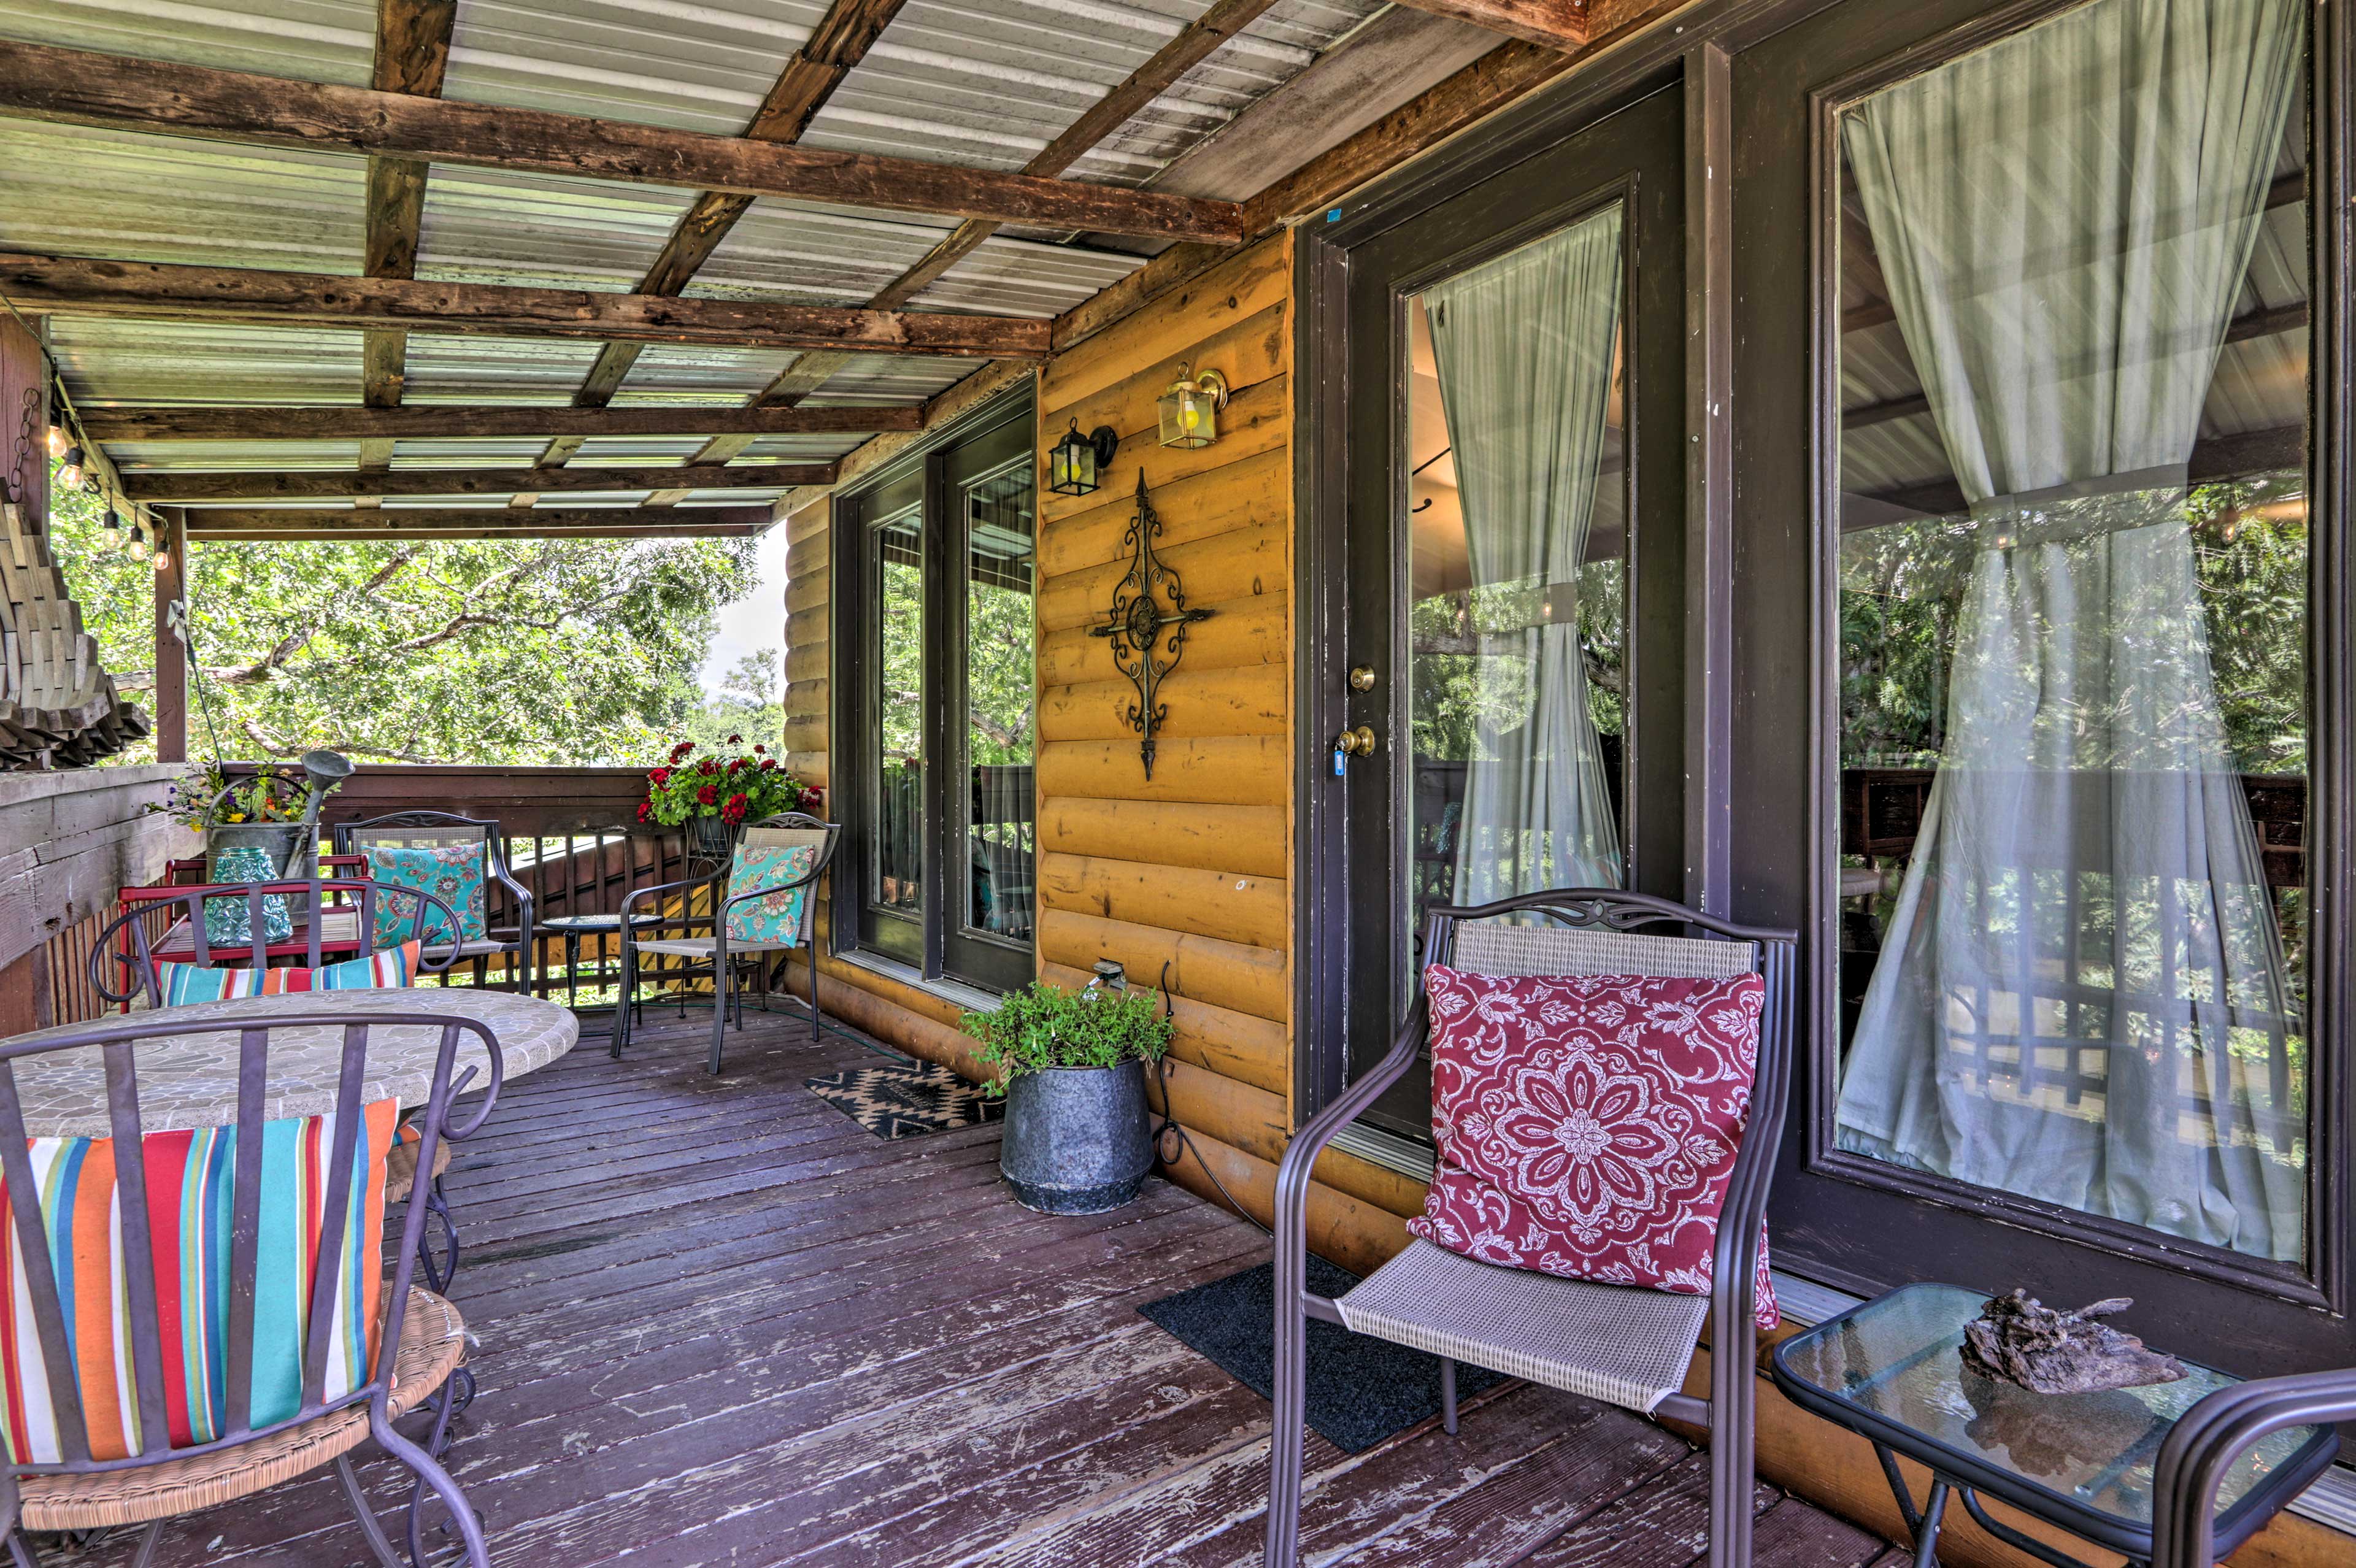 Embrace the fresh mountain air while sitting on the covered deck.